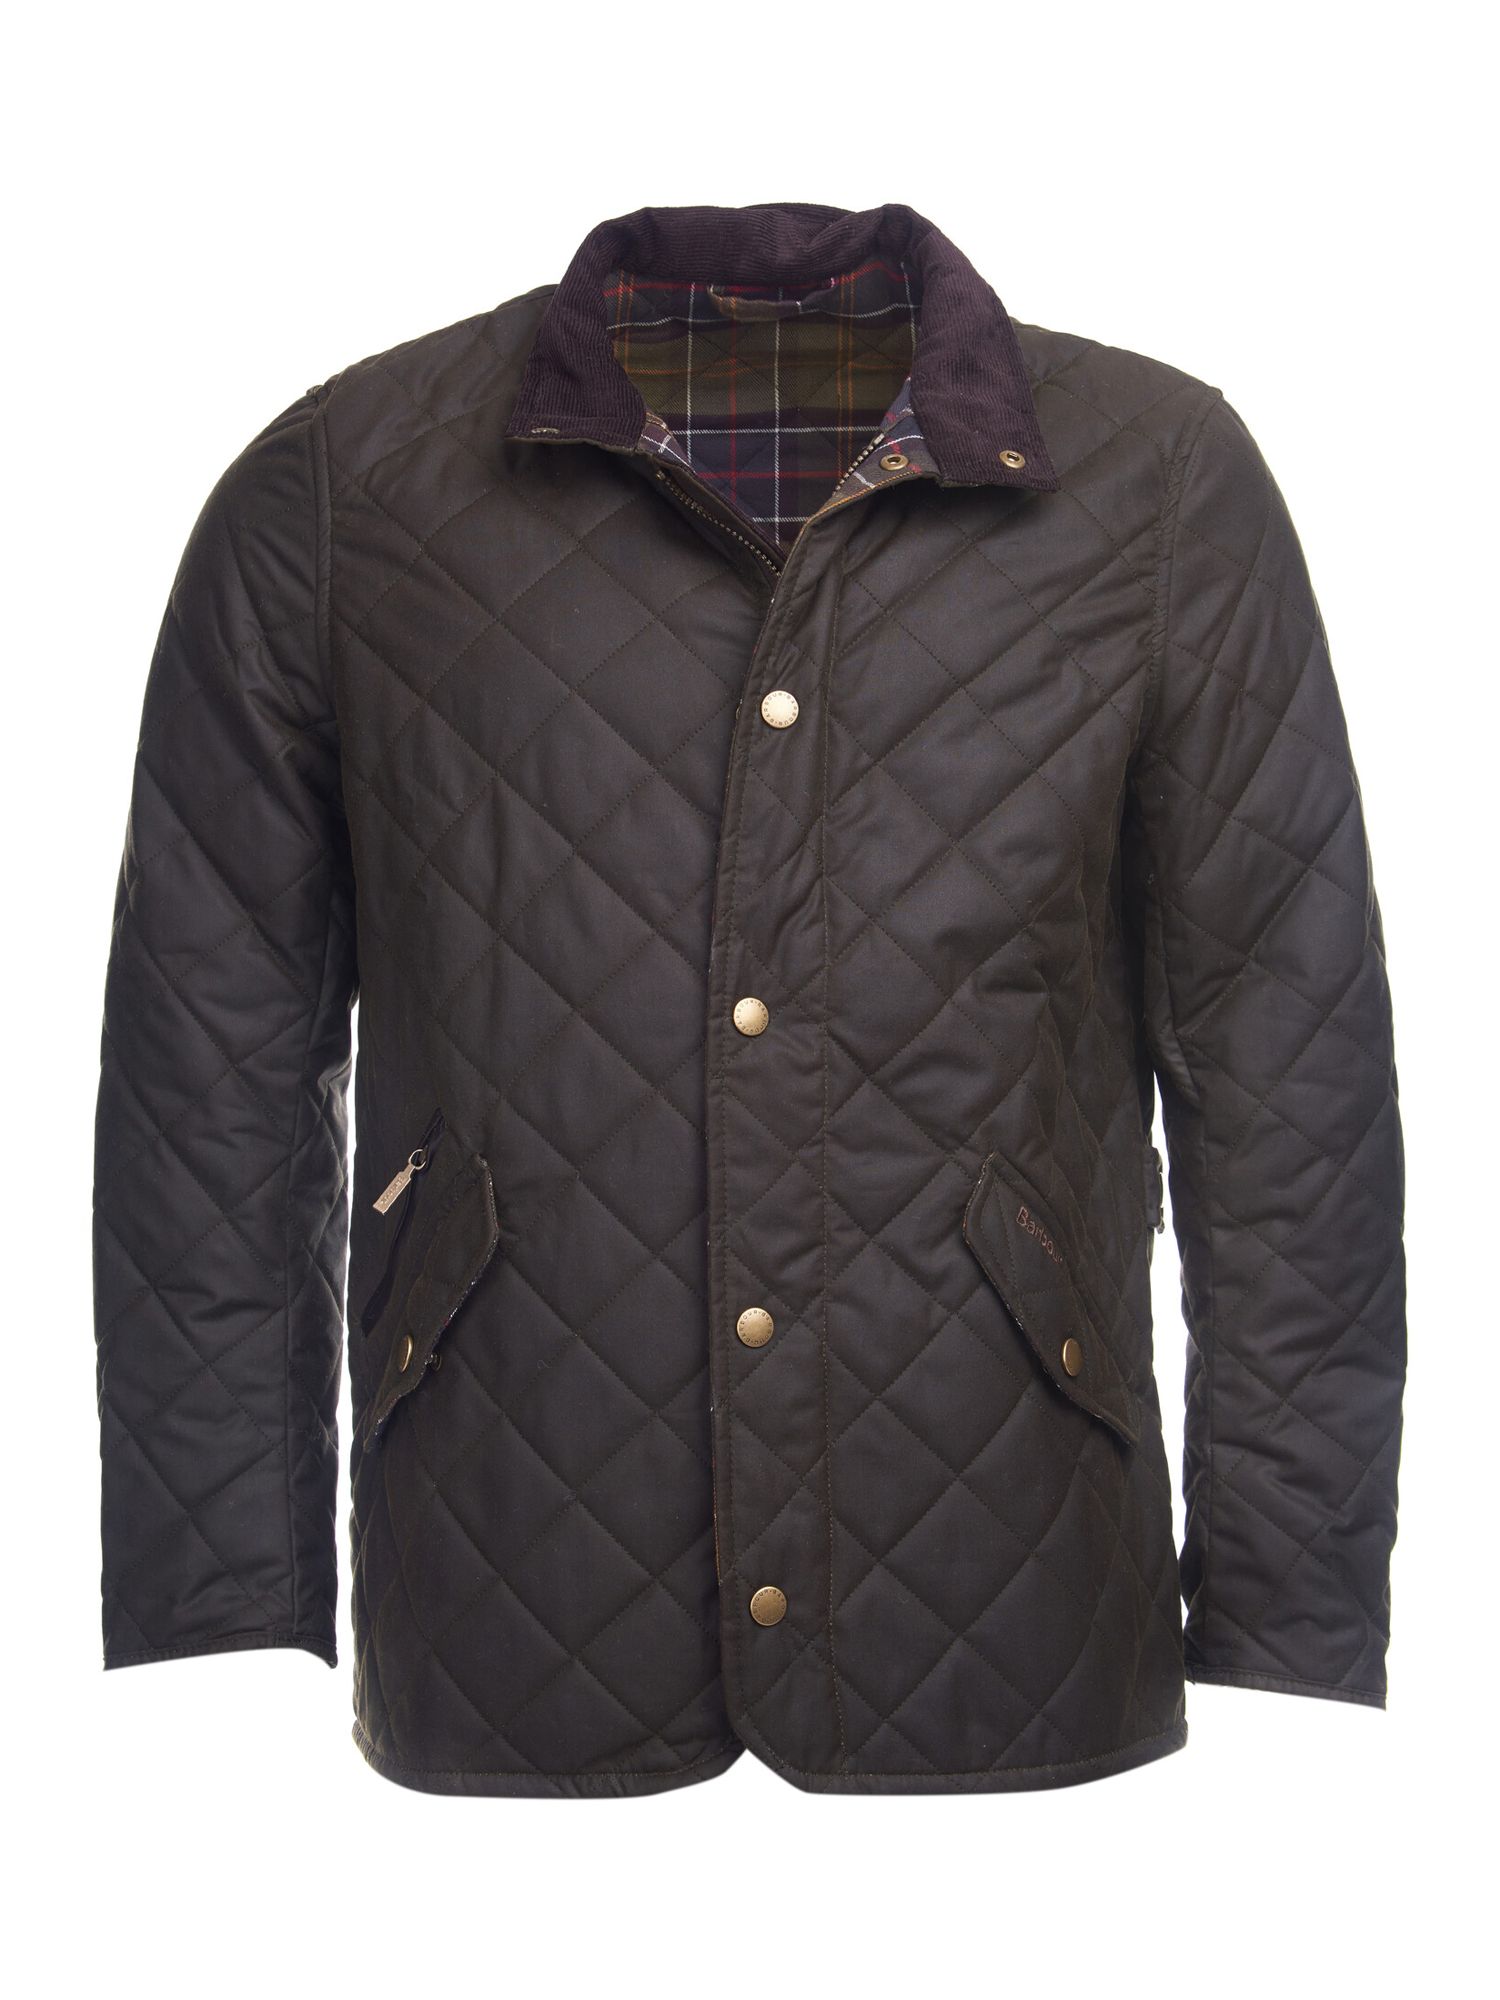 Barbour Winter Chelsea Quilted Jacket, Olive Green, S